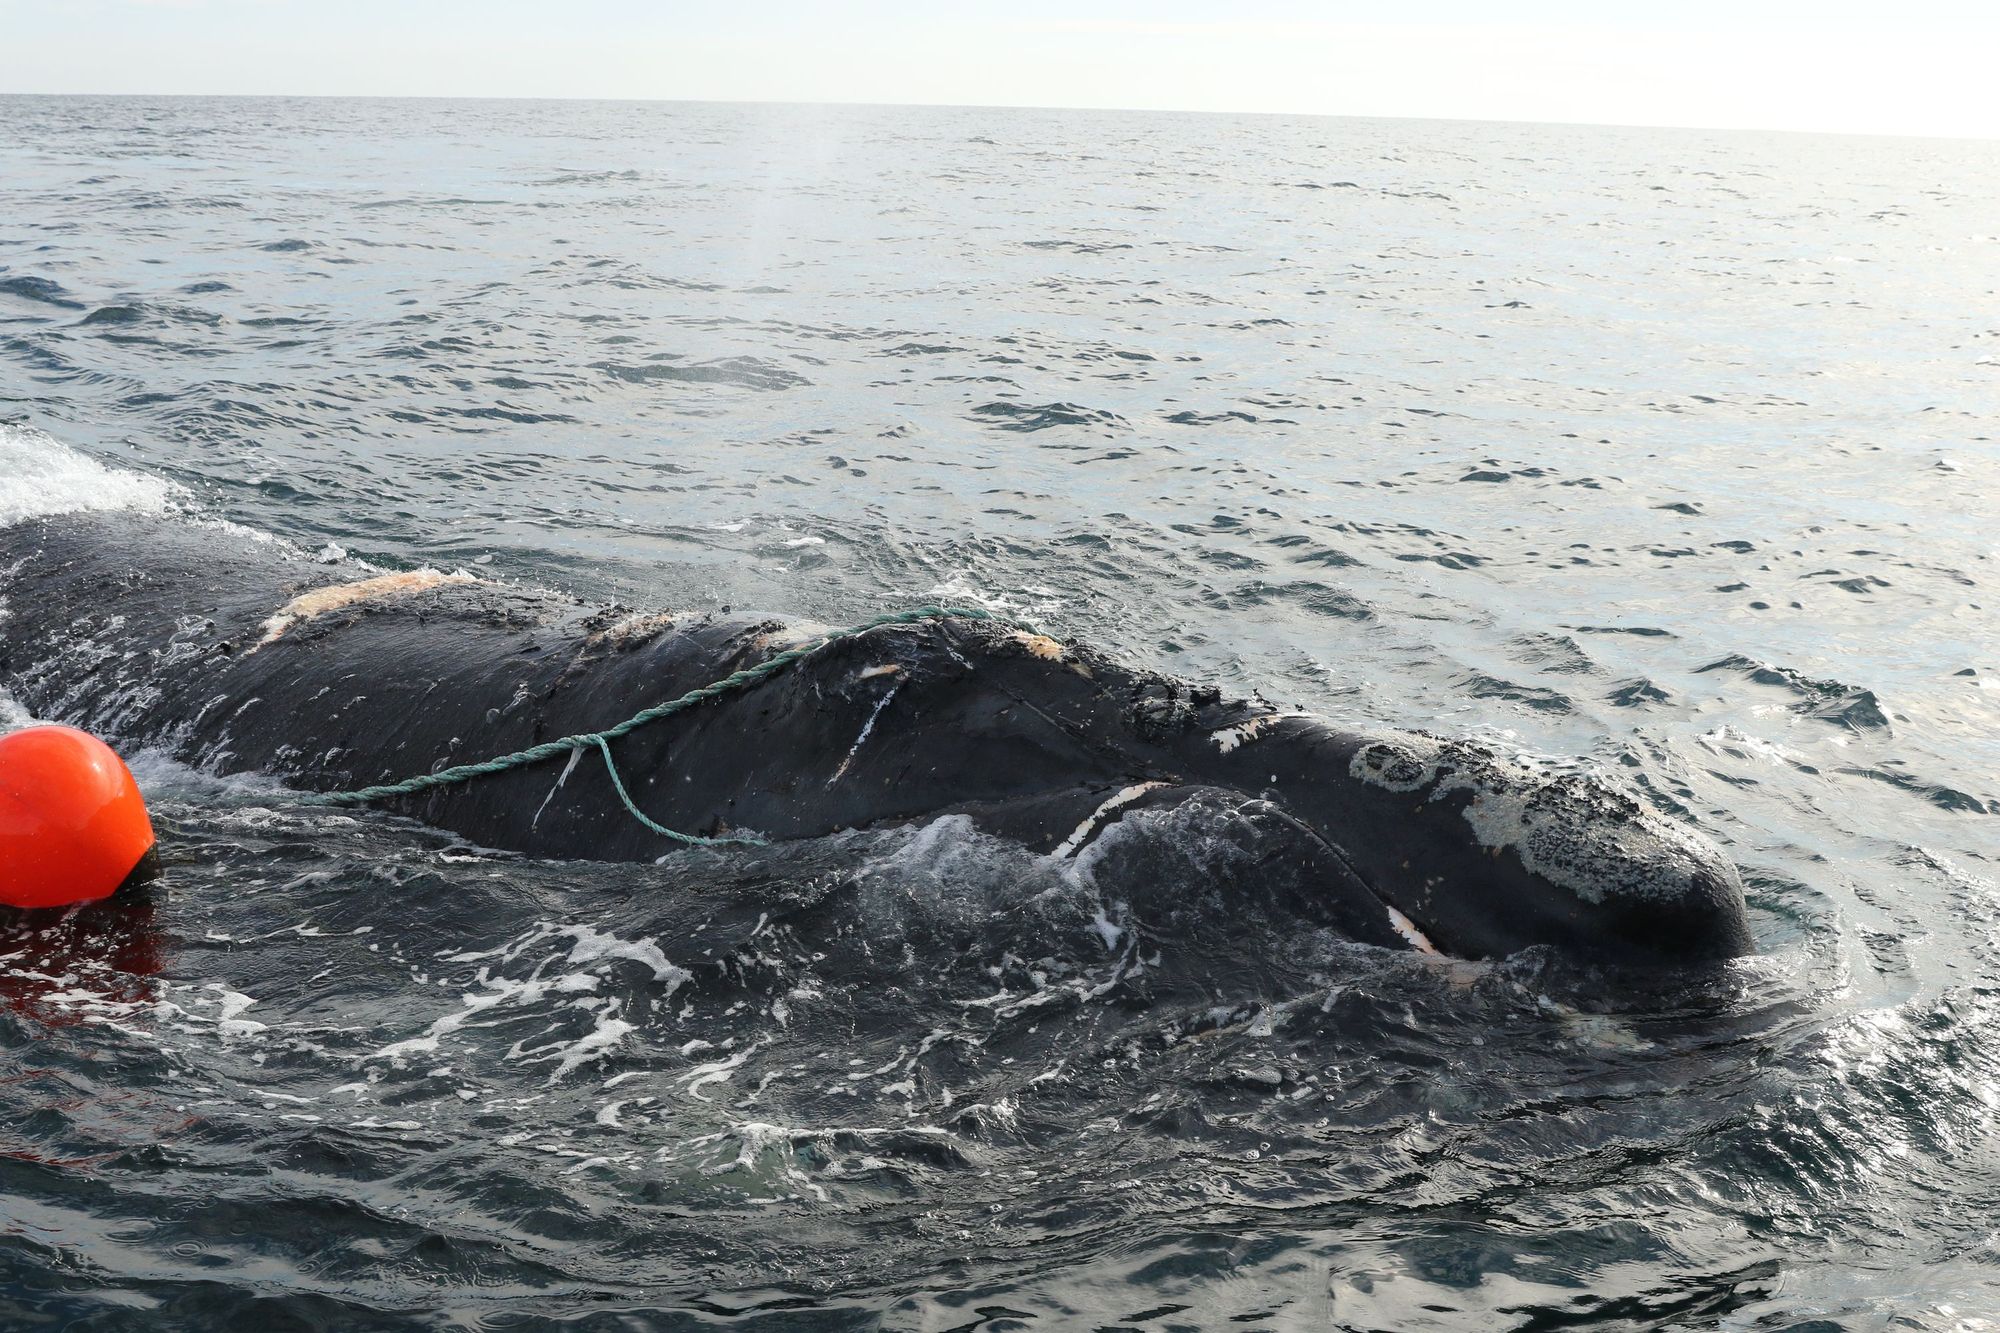 An entangled North Atlantic Right Whale. Credit: vessel image: Florida Fish and Wildlife Conservation Commission, NOAA Permit #18786